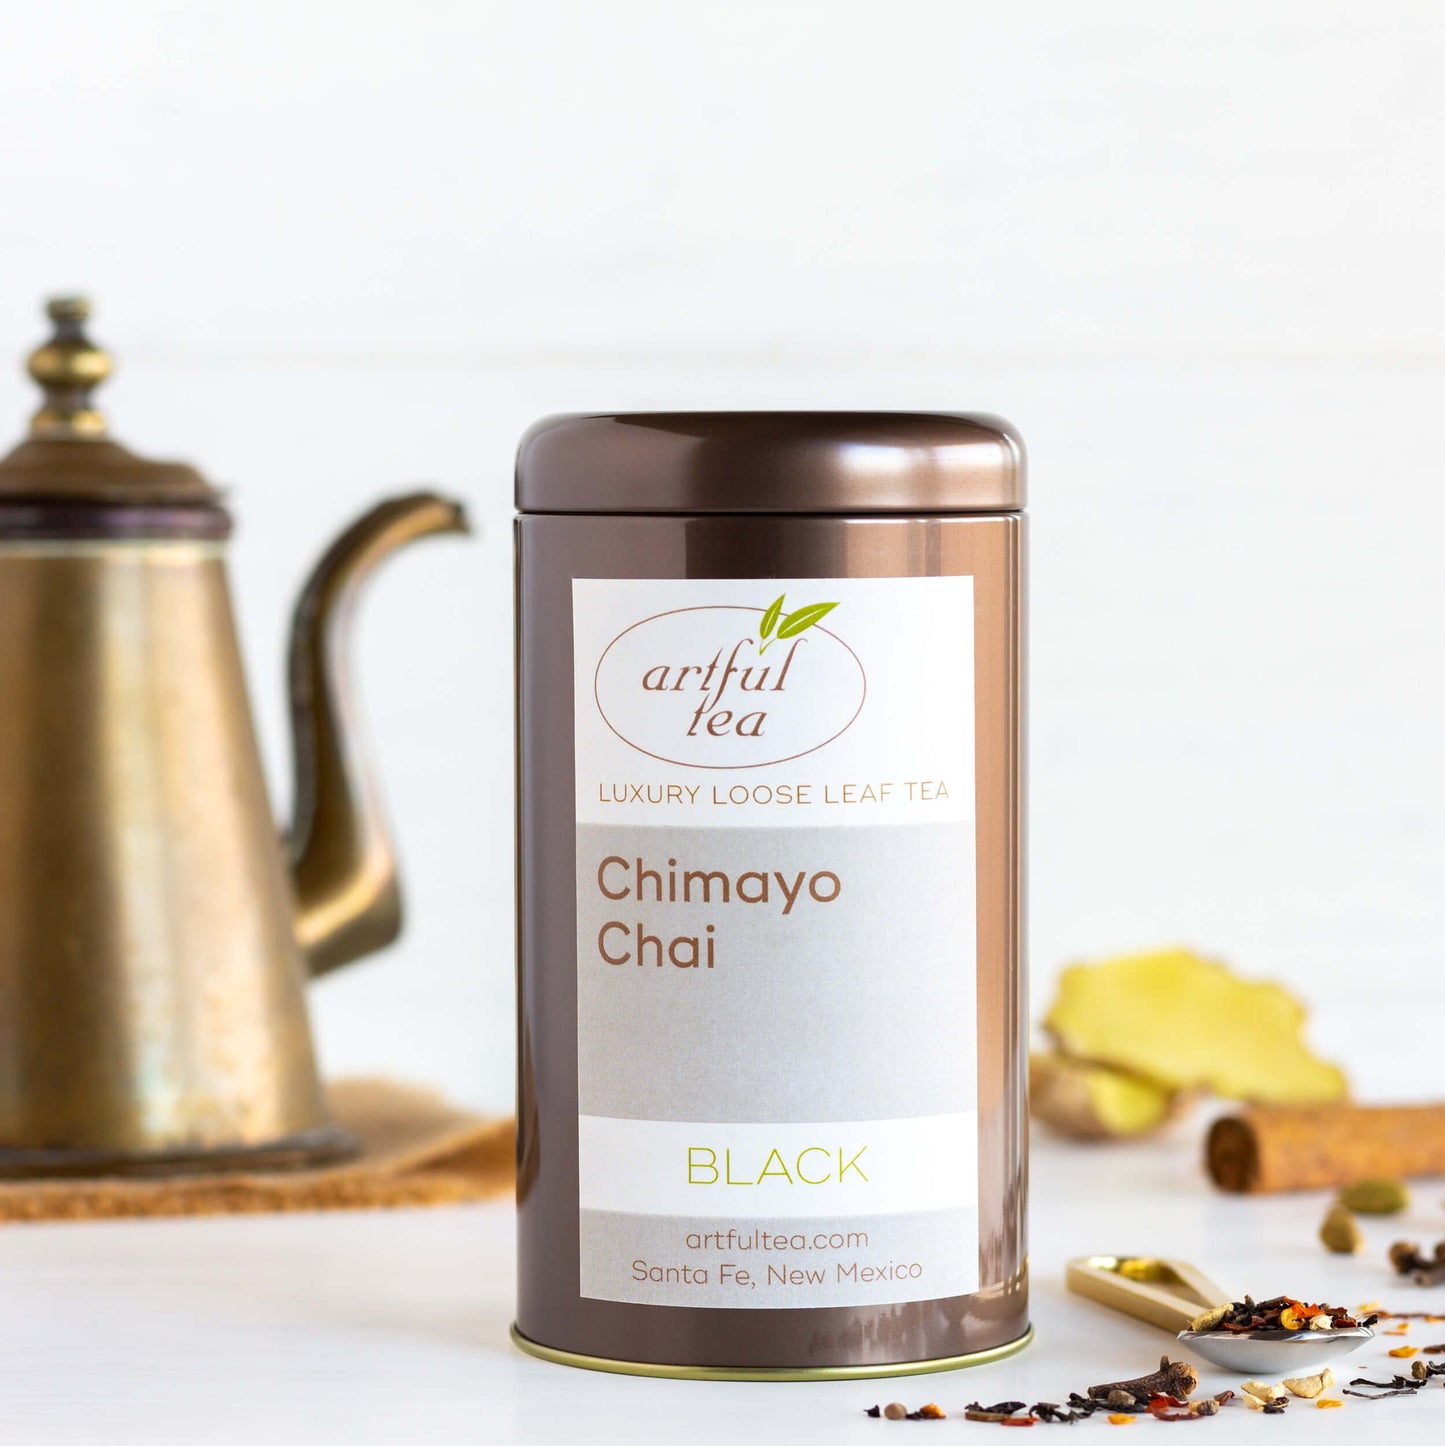 Chimayo Chai Black Tea shown packaged in a brown tin. A spoon with tea leaves and more ingredients are nearby. A copper teapot is in the background.